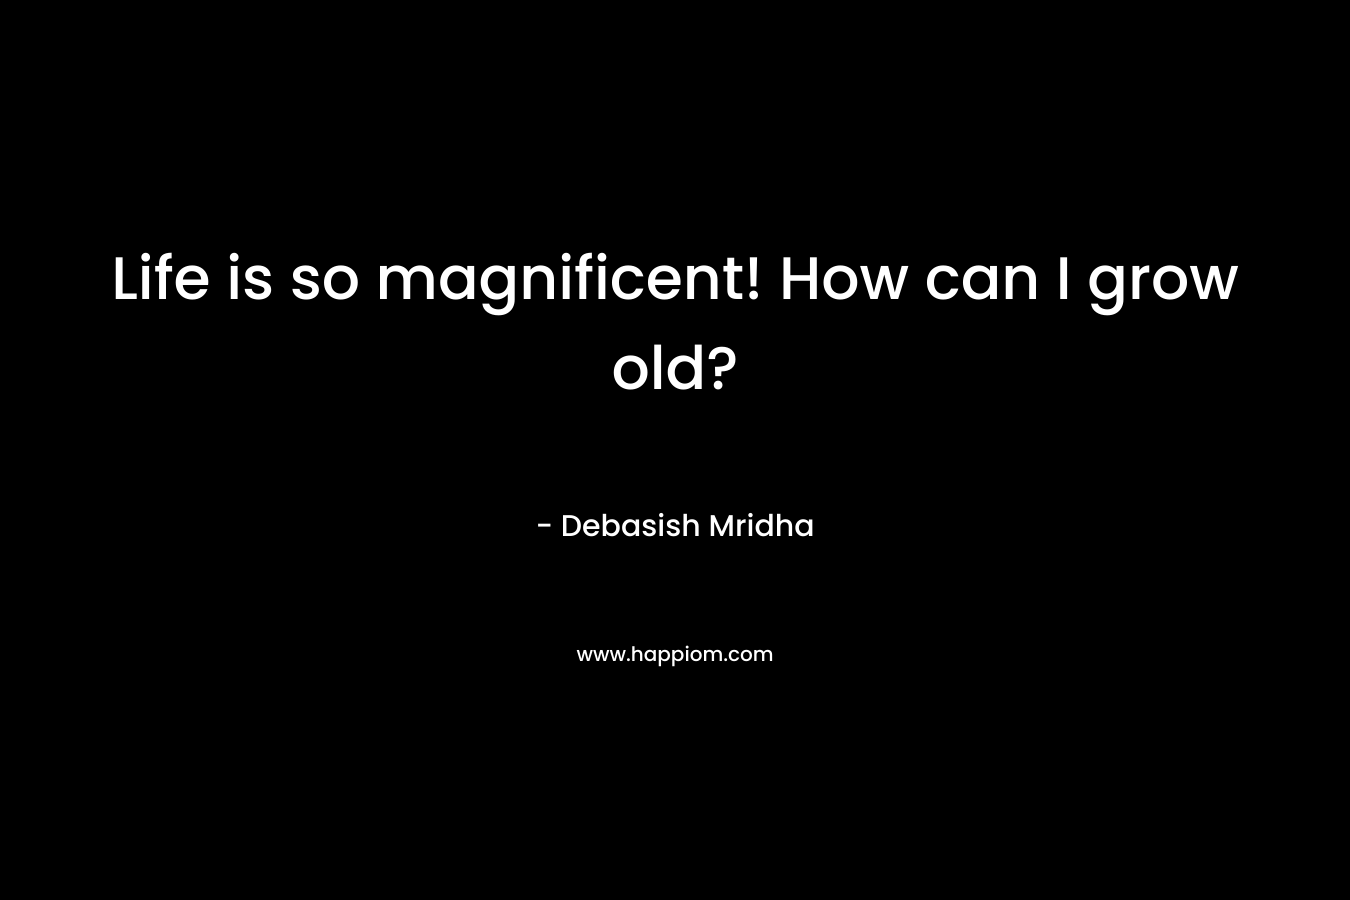 Life is so magnificent! How can I grow old?